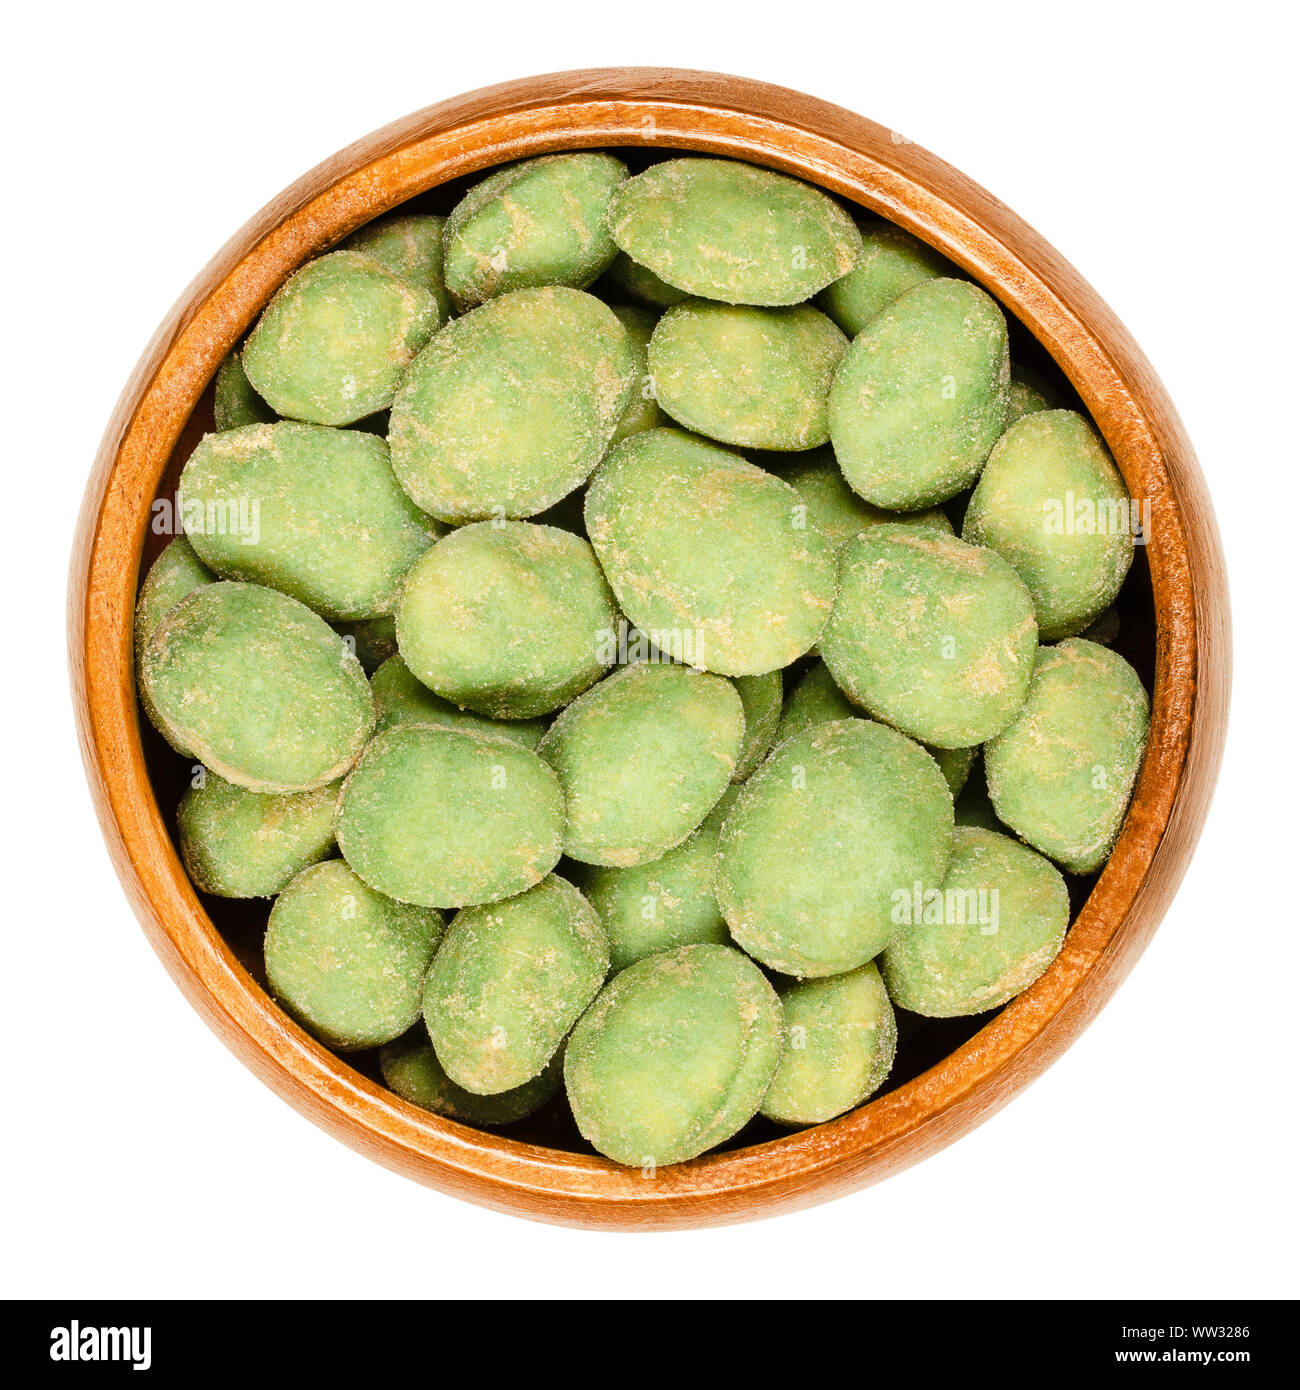 Wasabi peanuts in wooden bowl on white background. Green colored spicy nut snack. Peanuts in rice dough, coated with super hot wasabi powder. Stock Photo